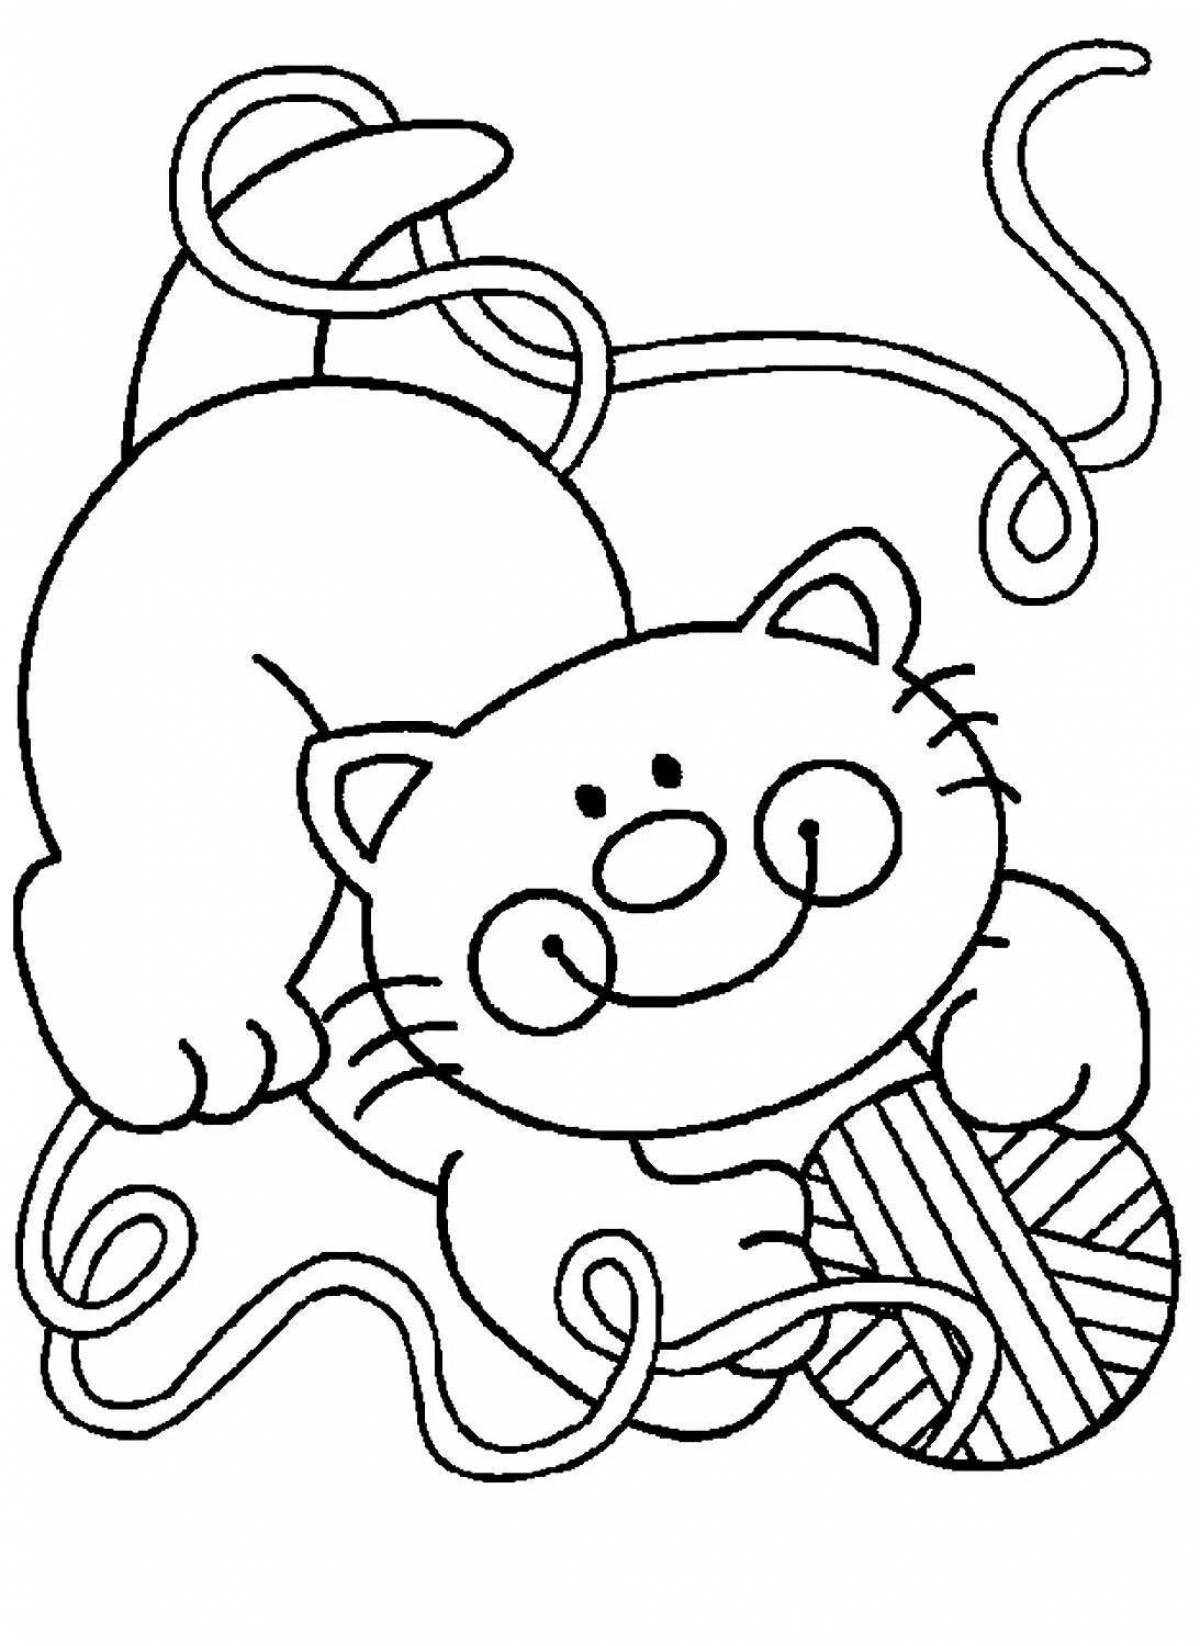 Coloring page grinning kitten with a ball